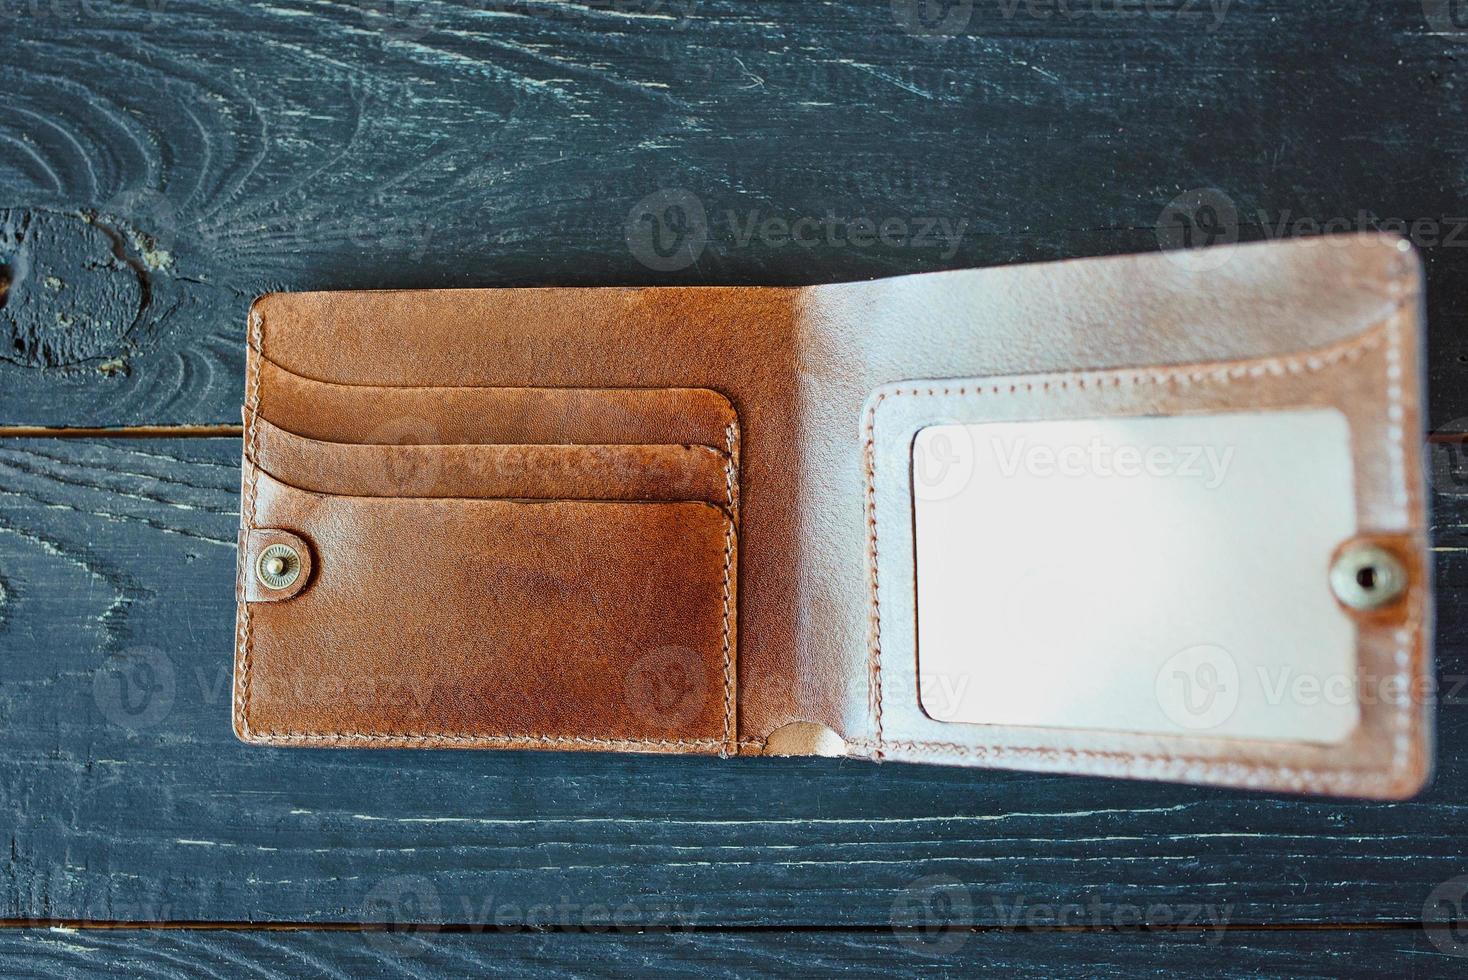 leather handmade craft vintage wallet on gray wooden background photo